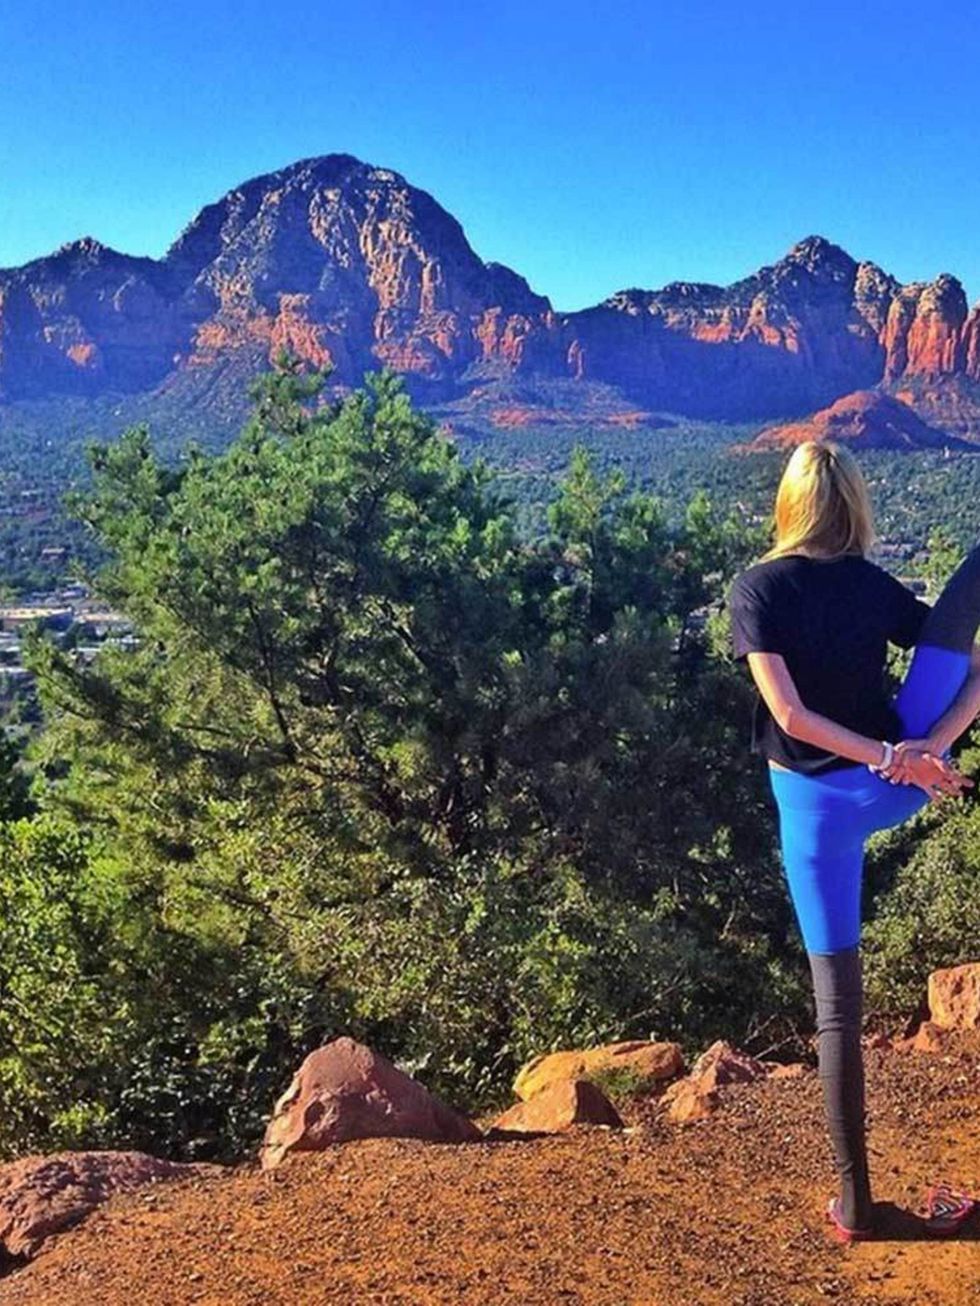 <p><a href="https://instagram.com/gypsetgoddess/">@gypsetgoddess</a> aka Flexi Yogi</p>

<p>This Arizona-based global nomad does everything from meditate on top of an elephant (as you do) to handstand atop a mountain. We're most impressed by her standing 